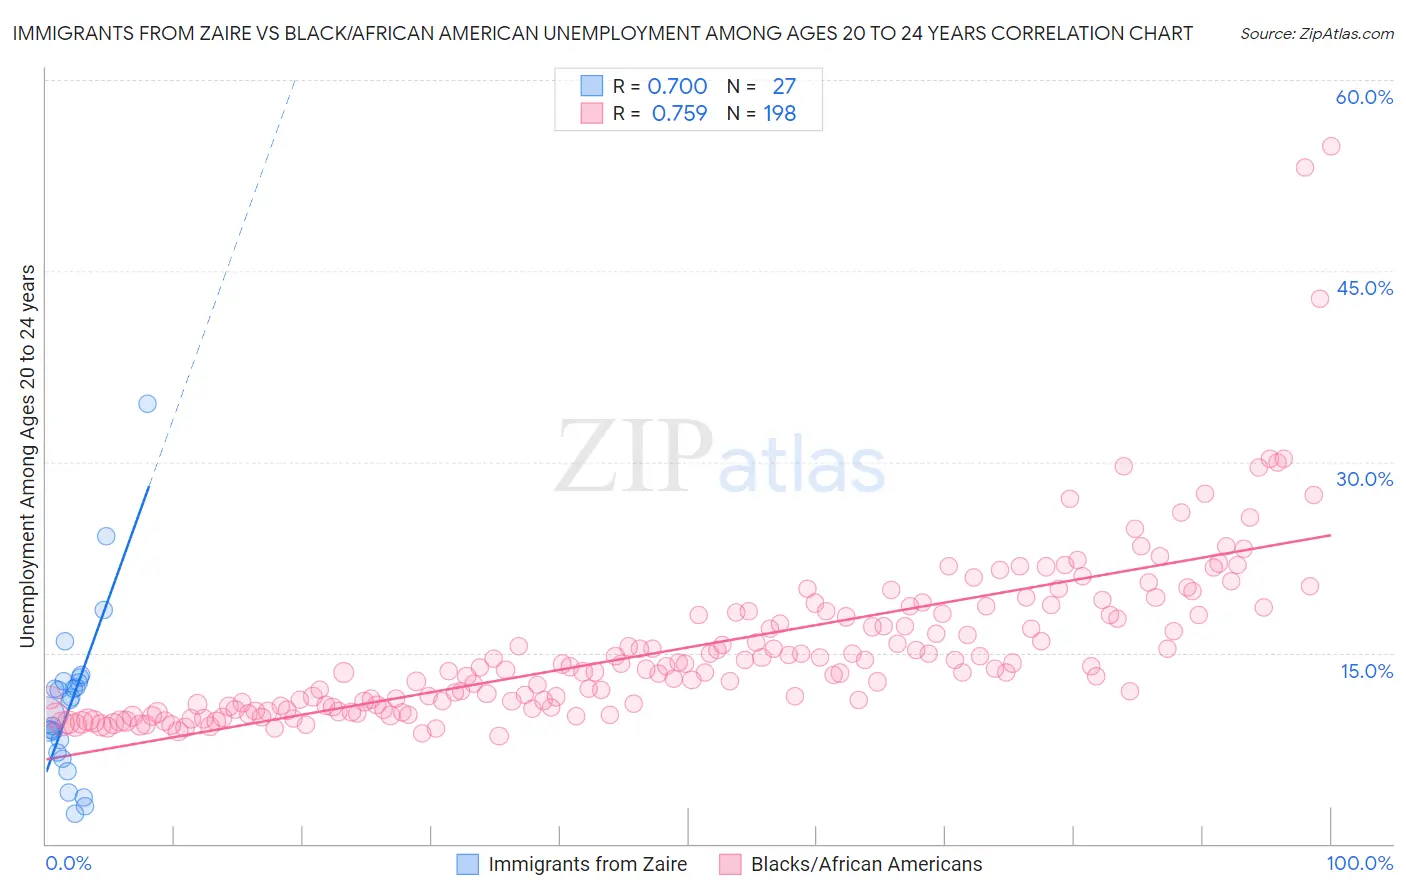 Immigrants from Zaire vs Black/African American Unemployment Among Ages 20 to 24 years